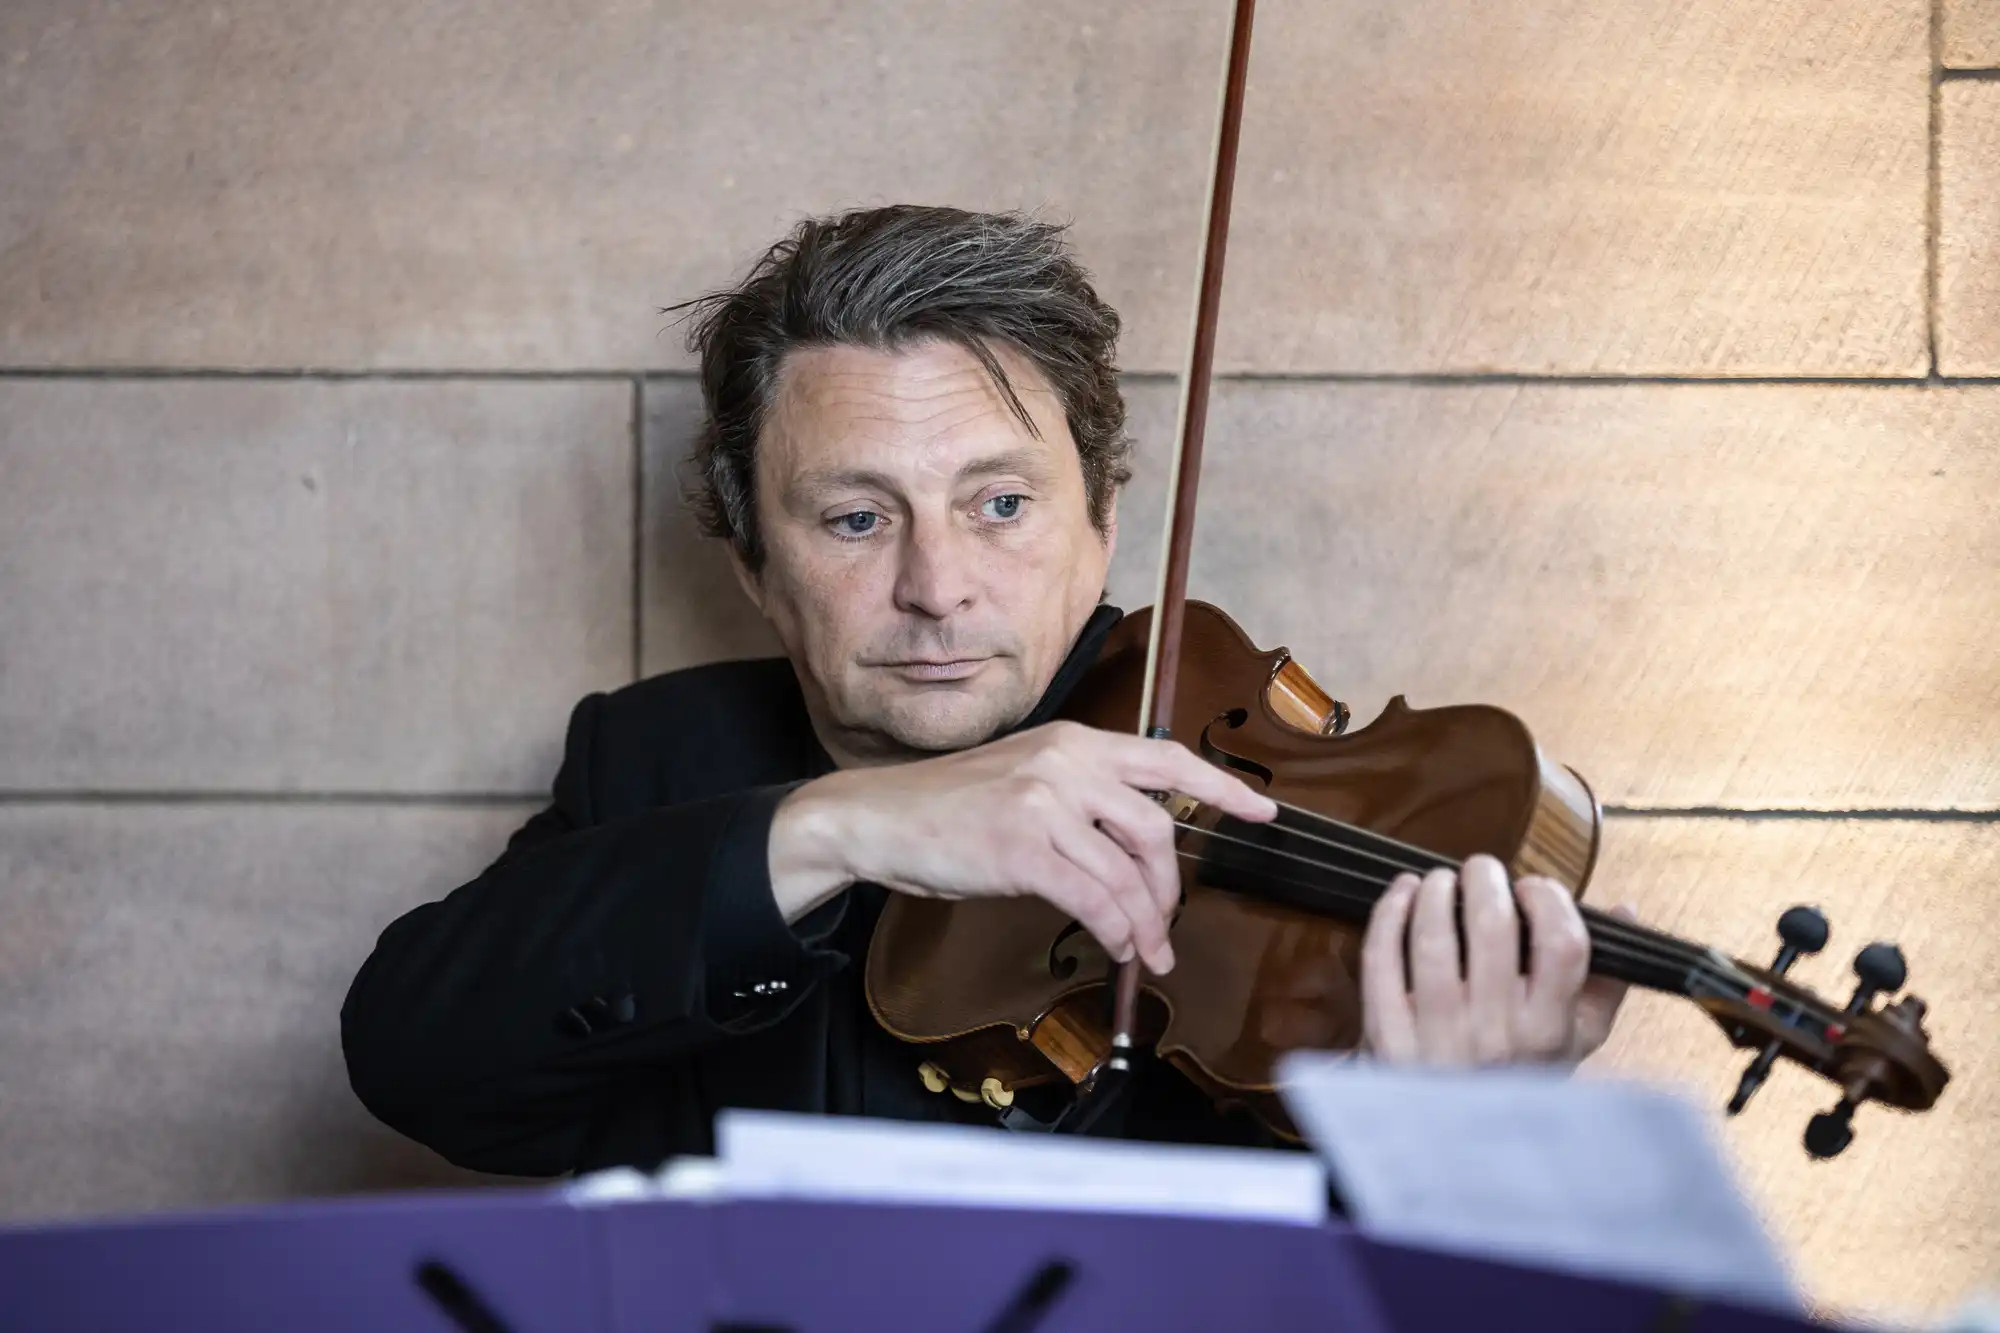 Man in a black suit playing a violin intently, seated next to sheet music.